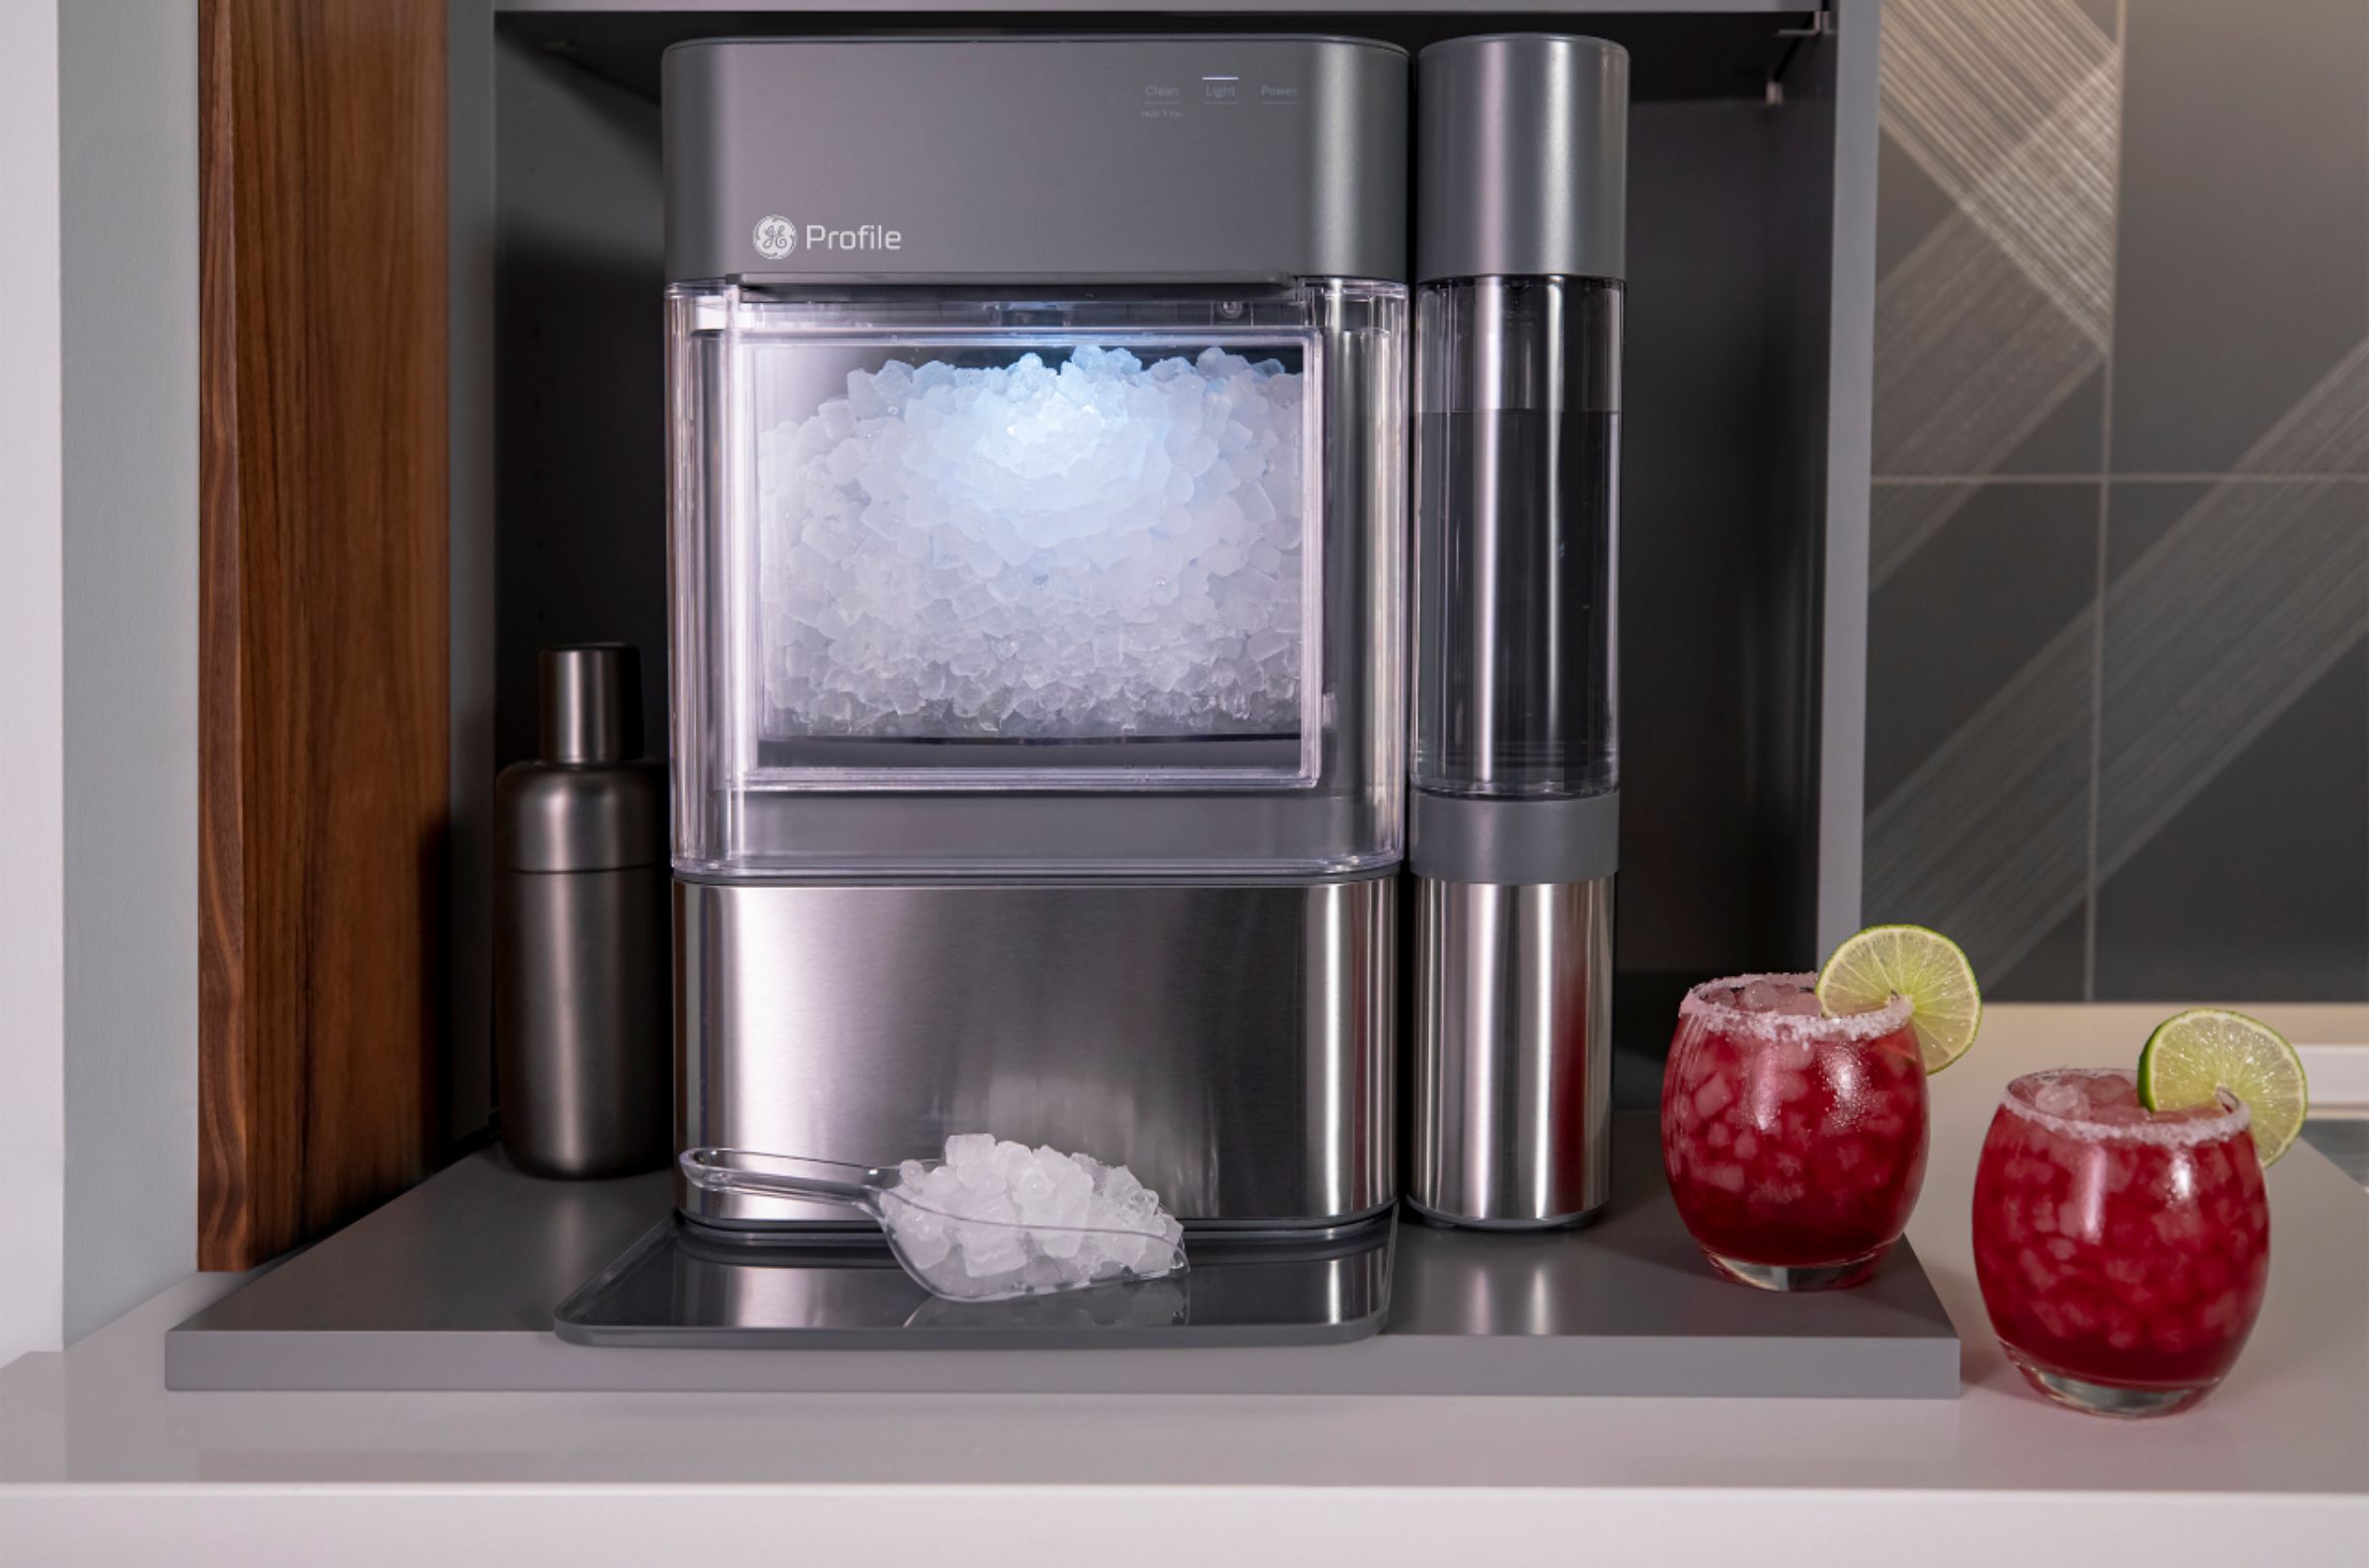 GE Profile Opal 1.0 Nugget Ice Maker with Side Tank – $298 (reg. $510)